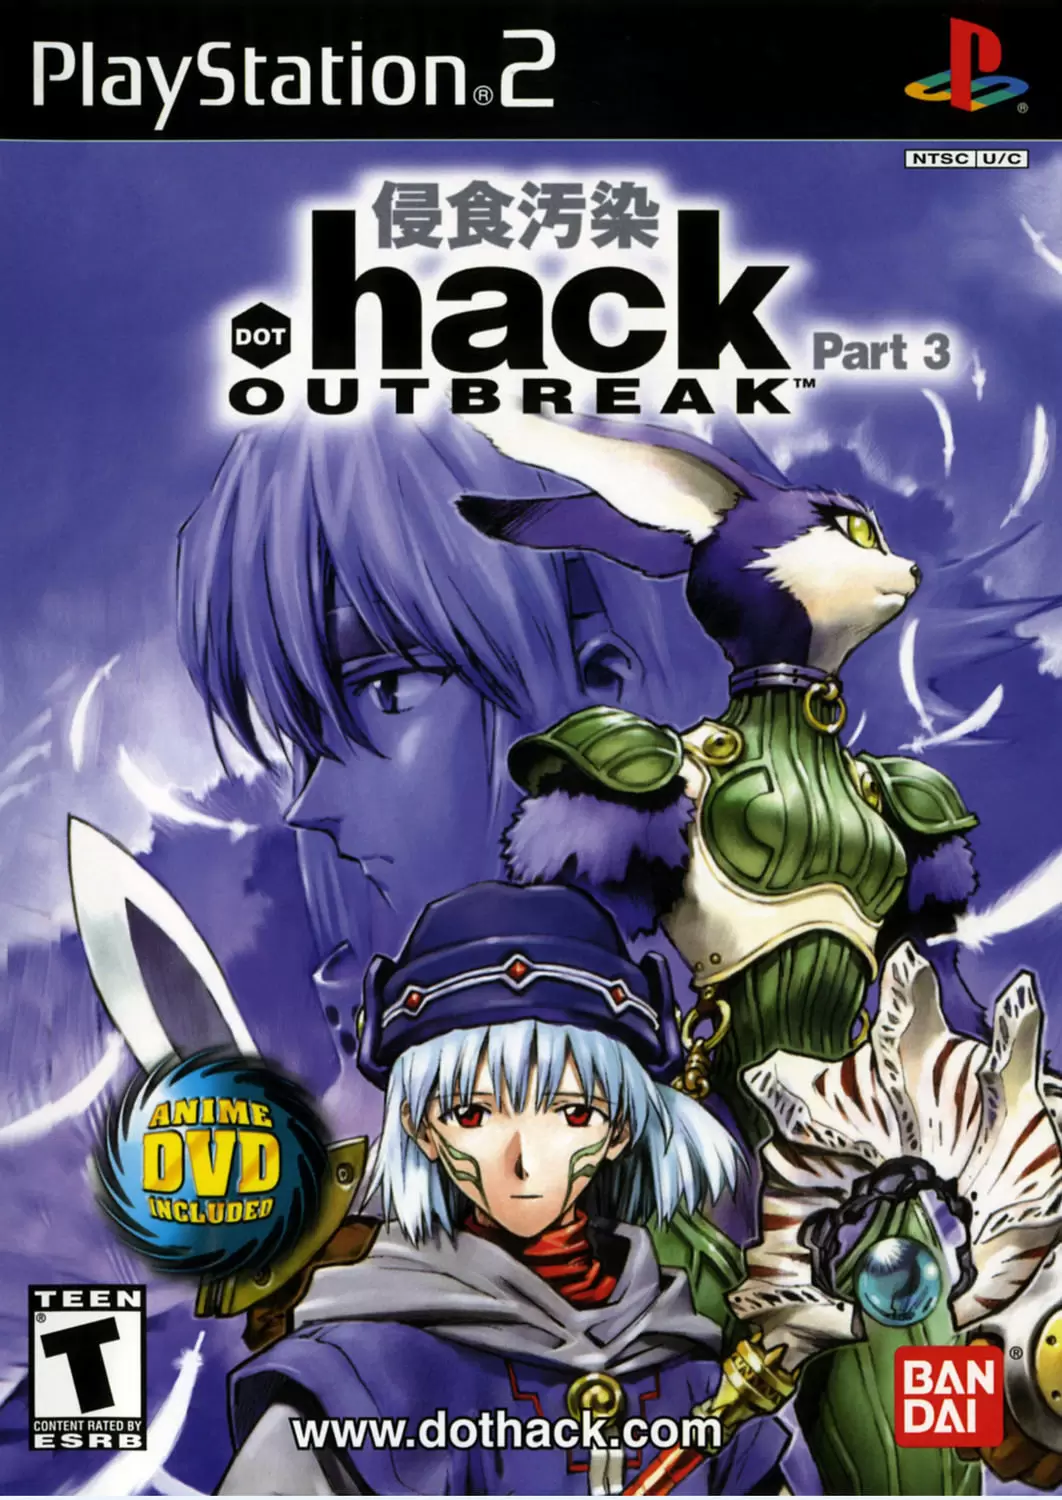 PS2 Games - .hack//Outbreak